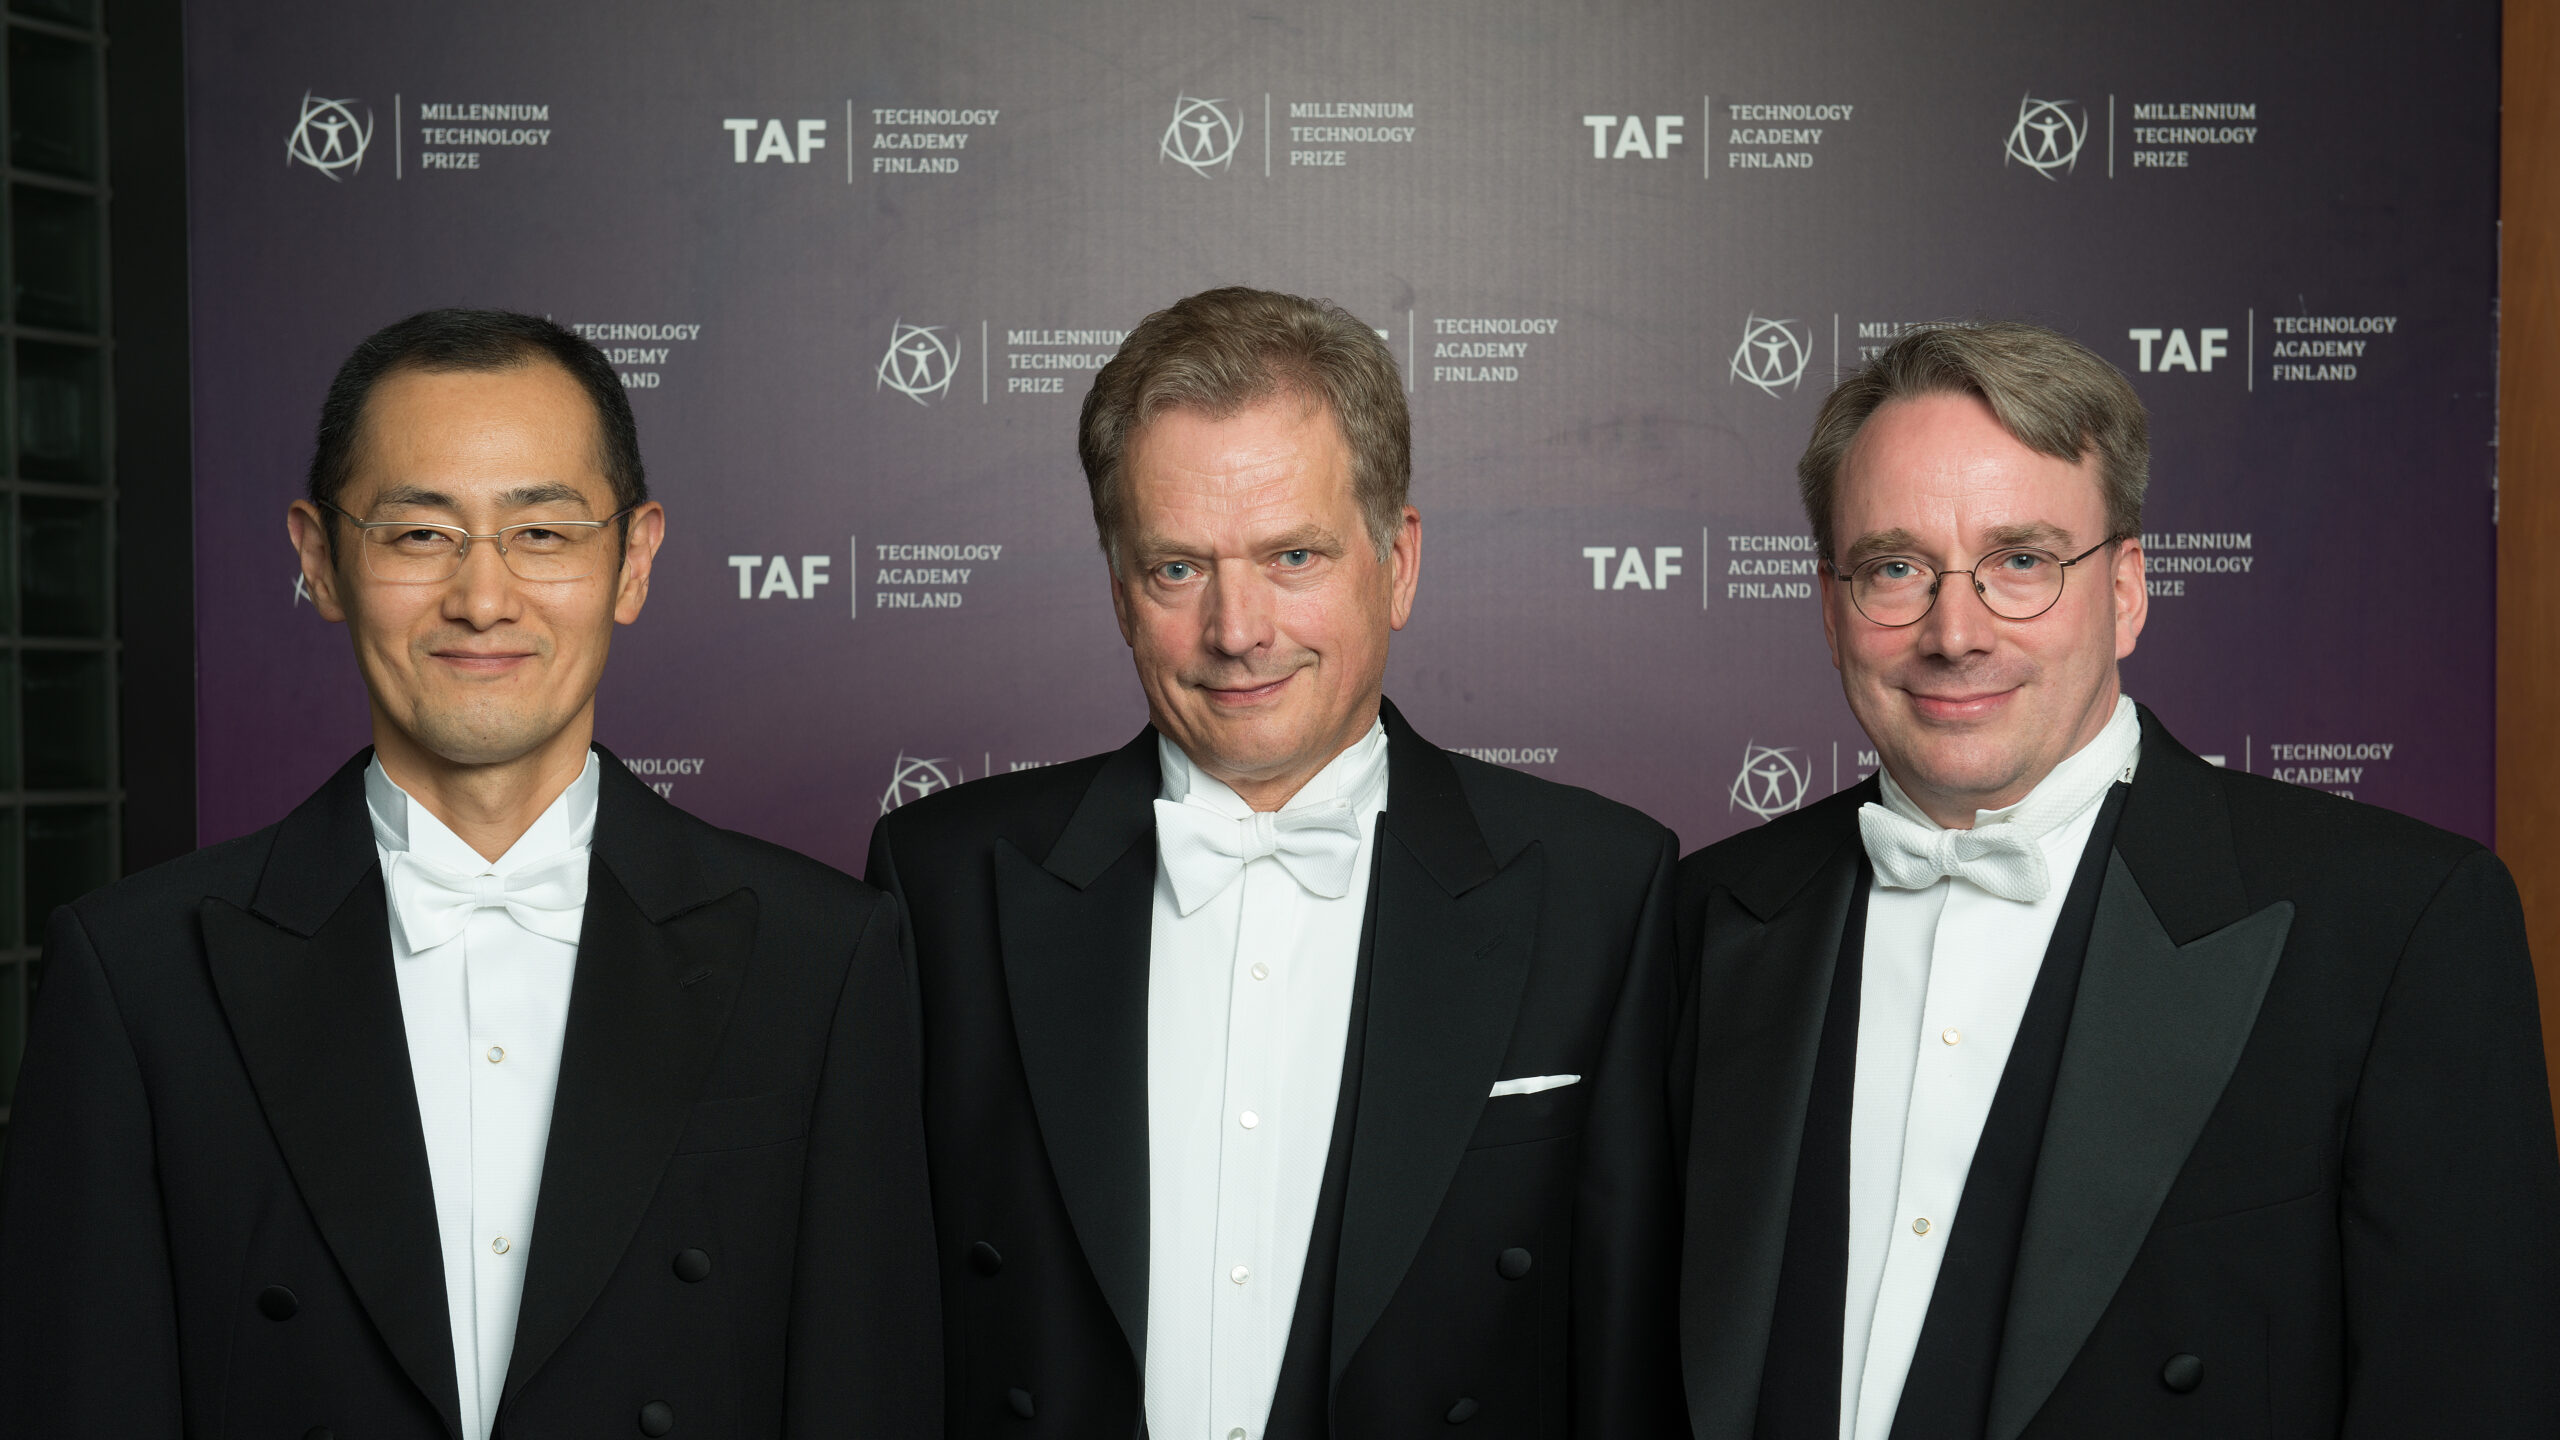 Photo of the 2012 Millennium Technology Prize winners Shinya Yamanaka and Linus Torvalds with president Sauli Niinistö in the middle.